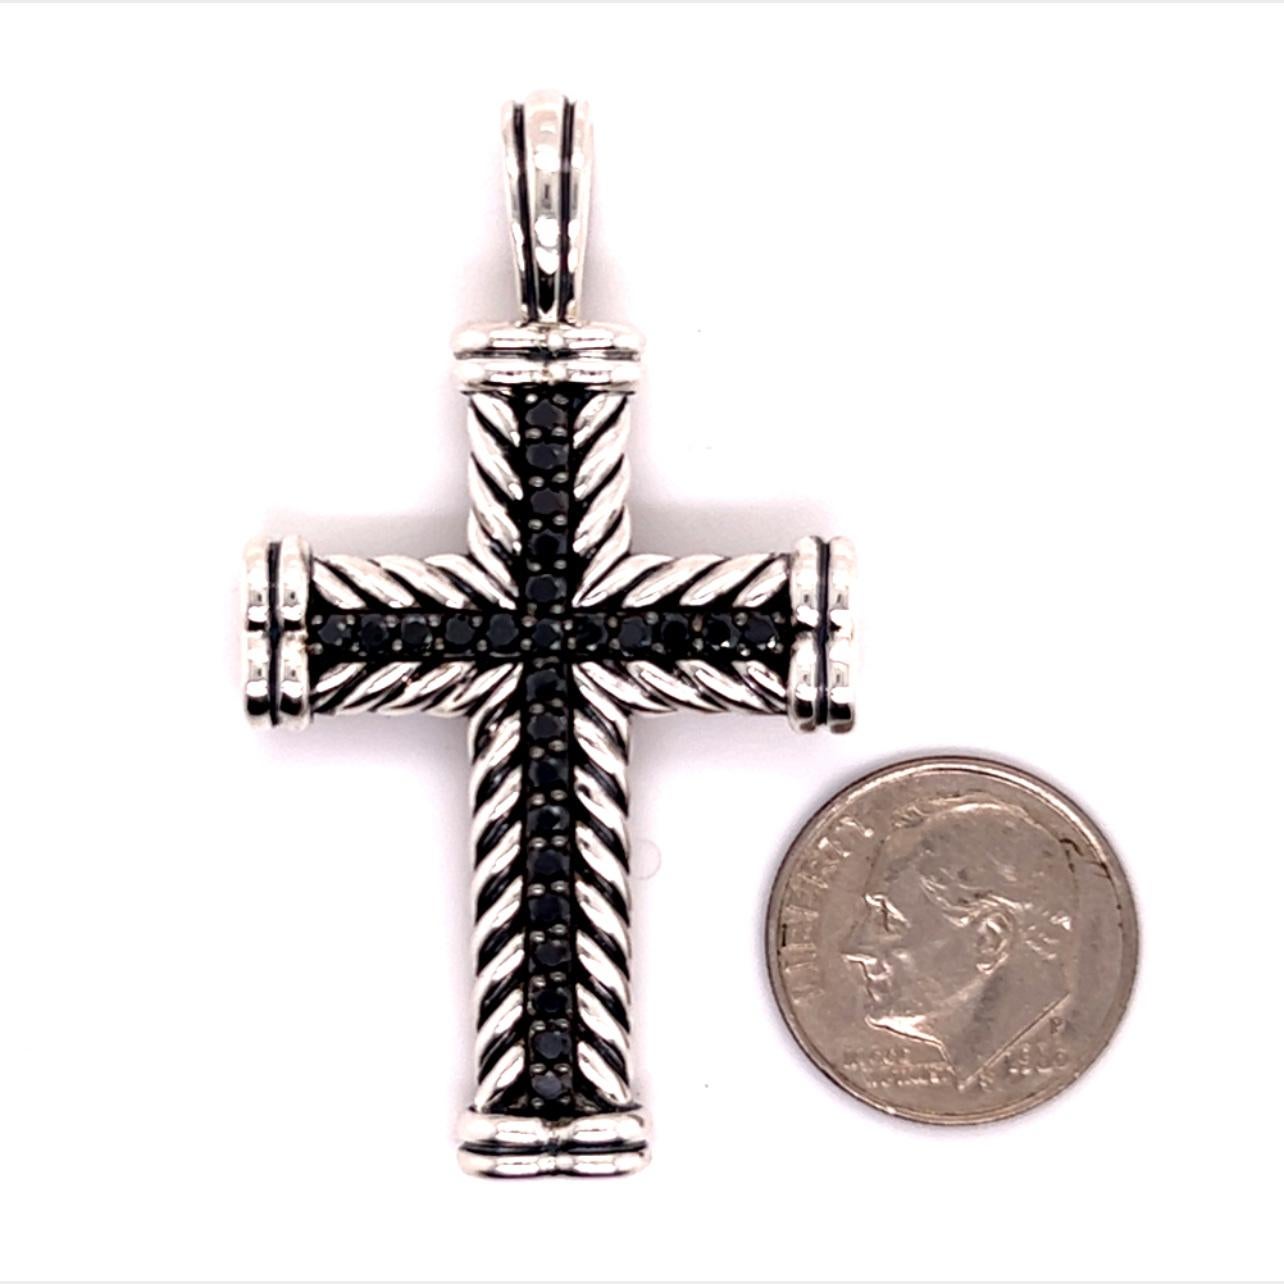 David Yurman Estate Black Diamond Chevron Silver Cross Pendant 16.5g DY435

Retails $999.00

This elegant Authentic David Yurman cross pendant is made of sterling silver and has a weight of 16.5 grams.

TRUSTED SELLER SINCE 2002

PLEASE SEE OUR